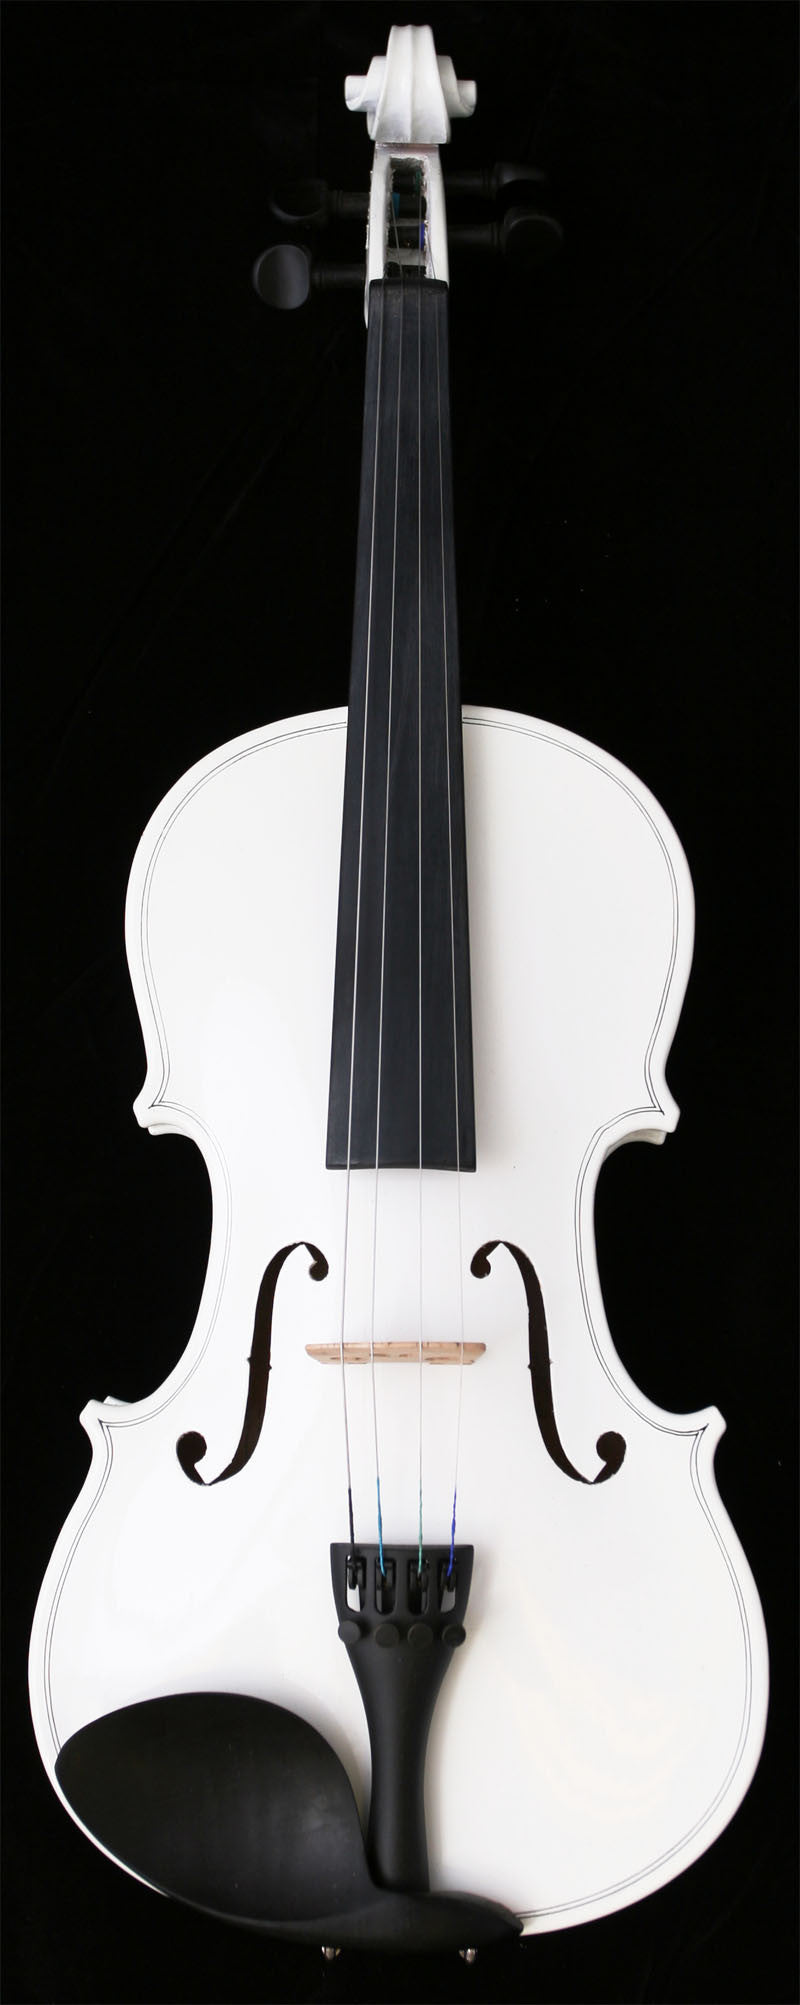 Crescent Direct Vl-wt1/8 1/8 White Maplewood Acoustic Violin With Case, Rosin, And Bow